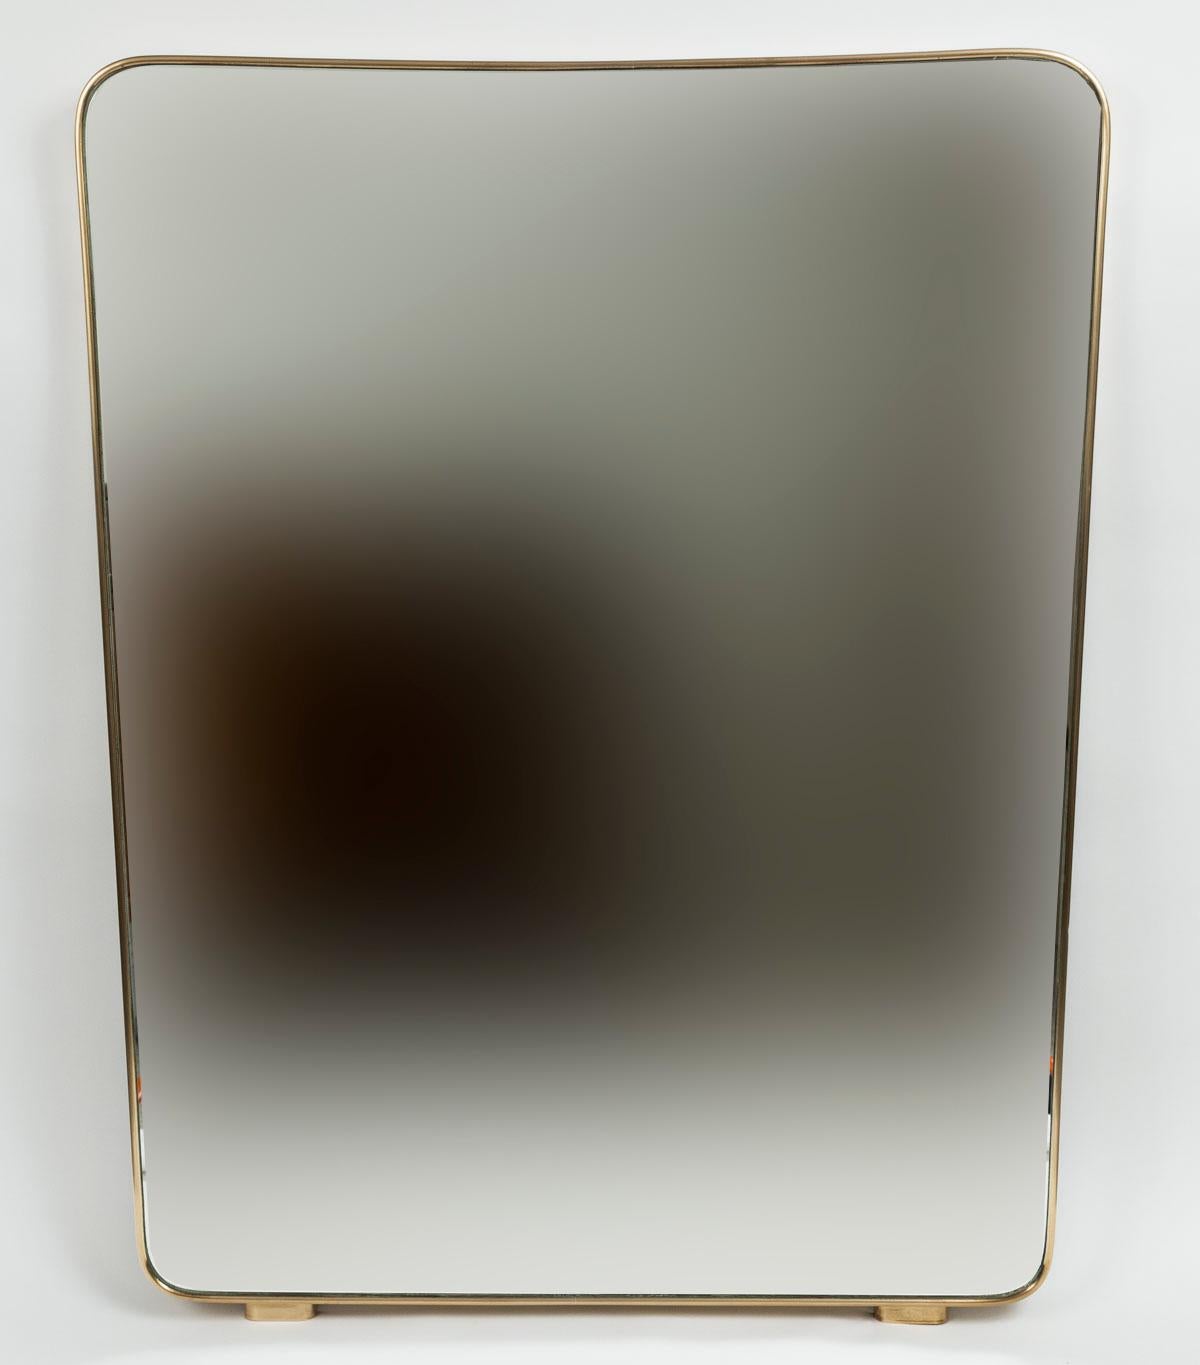 An all orginal period Italian Design mirror in a modified tapered rectangular shape-great scale and form and shown with its orginal wooden back.

Origin: Italy

Dating: 1950ca

Condition:Very Good, brass is handpolished, looking glass was replaced